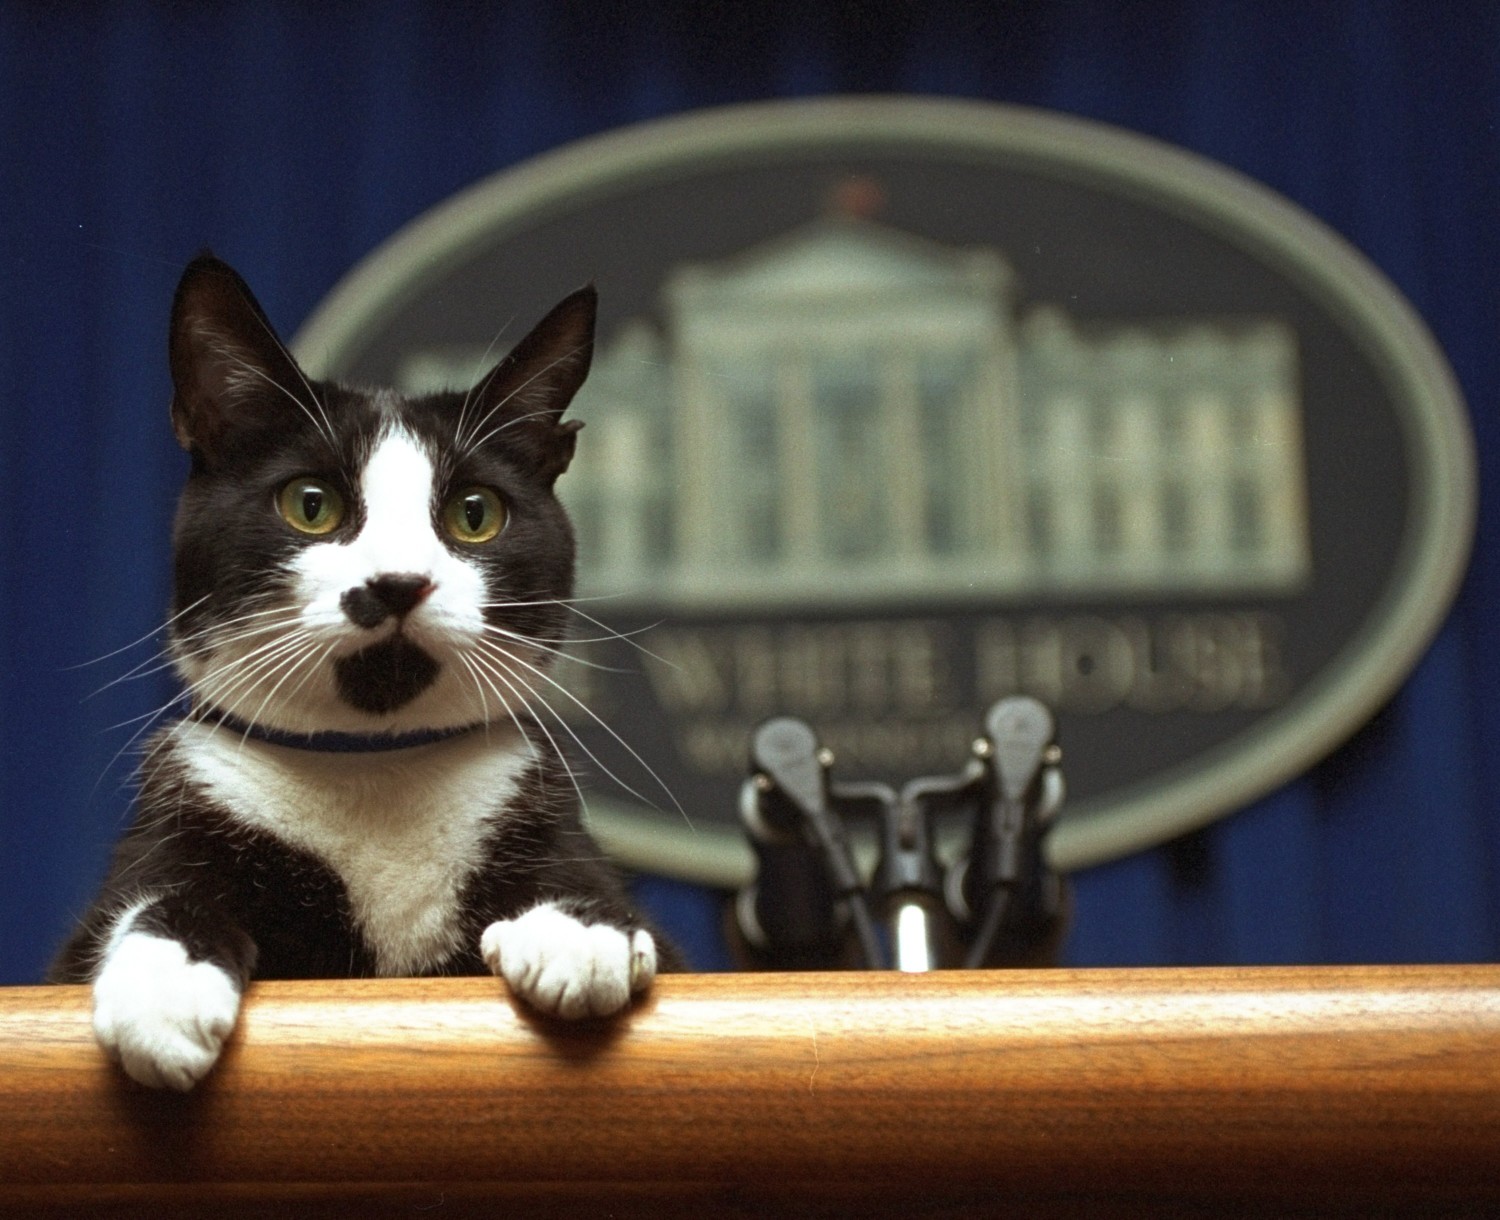 FILE- In this March 19, 1994 file photo, President Bill Clinton's cat Socks peers over the podium in the White House briefing room in Washington. Pets are back at the White House. President Joe Biden's German shepherds Champ and Major moved in over the weekend. They are the first dogs to live at the executive mansion since the Obama administration. Biden and his wife, Jill, adopted Major in 2018 from the Delaware Humane Association. They got Champ after the 2008 election. (AP Photo/Marcy Nighswander, File)